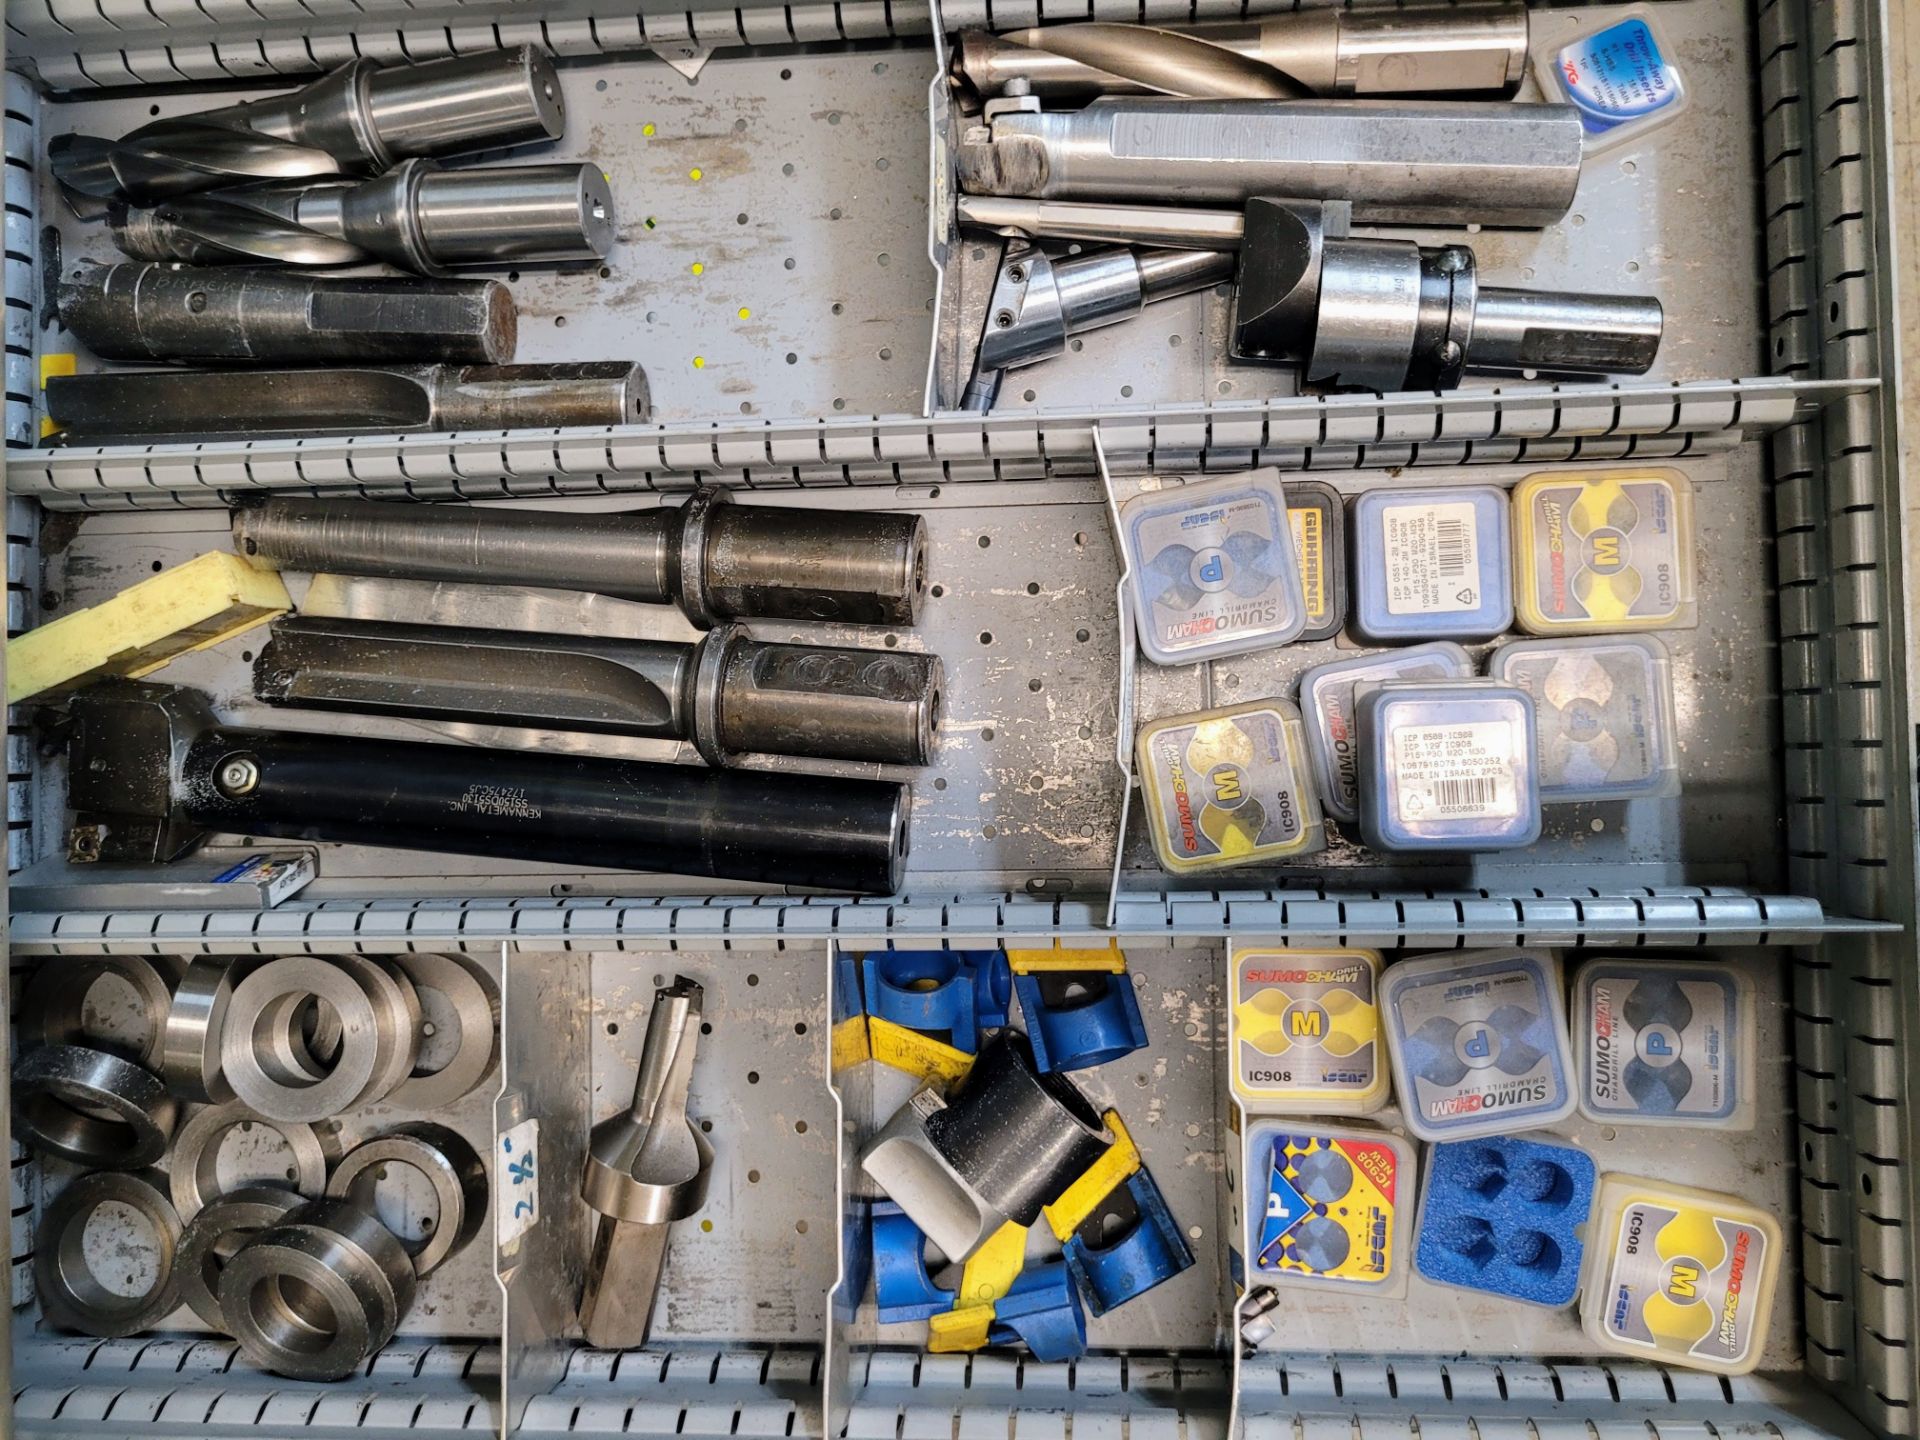 CONTENTS OF (1) TOOL CABINET DRAWER INCLUDING CARBIDE INSERTS AND CUTTING BARS, ETC. (NO DRAWERS) - Image 2 of 3